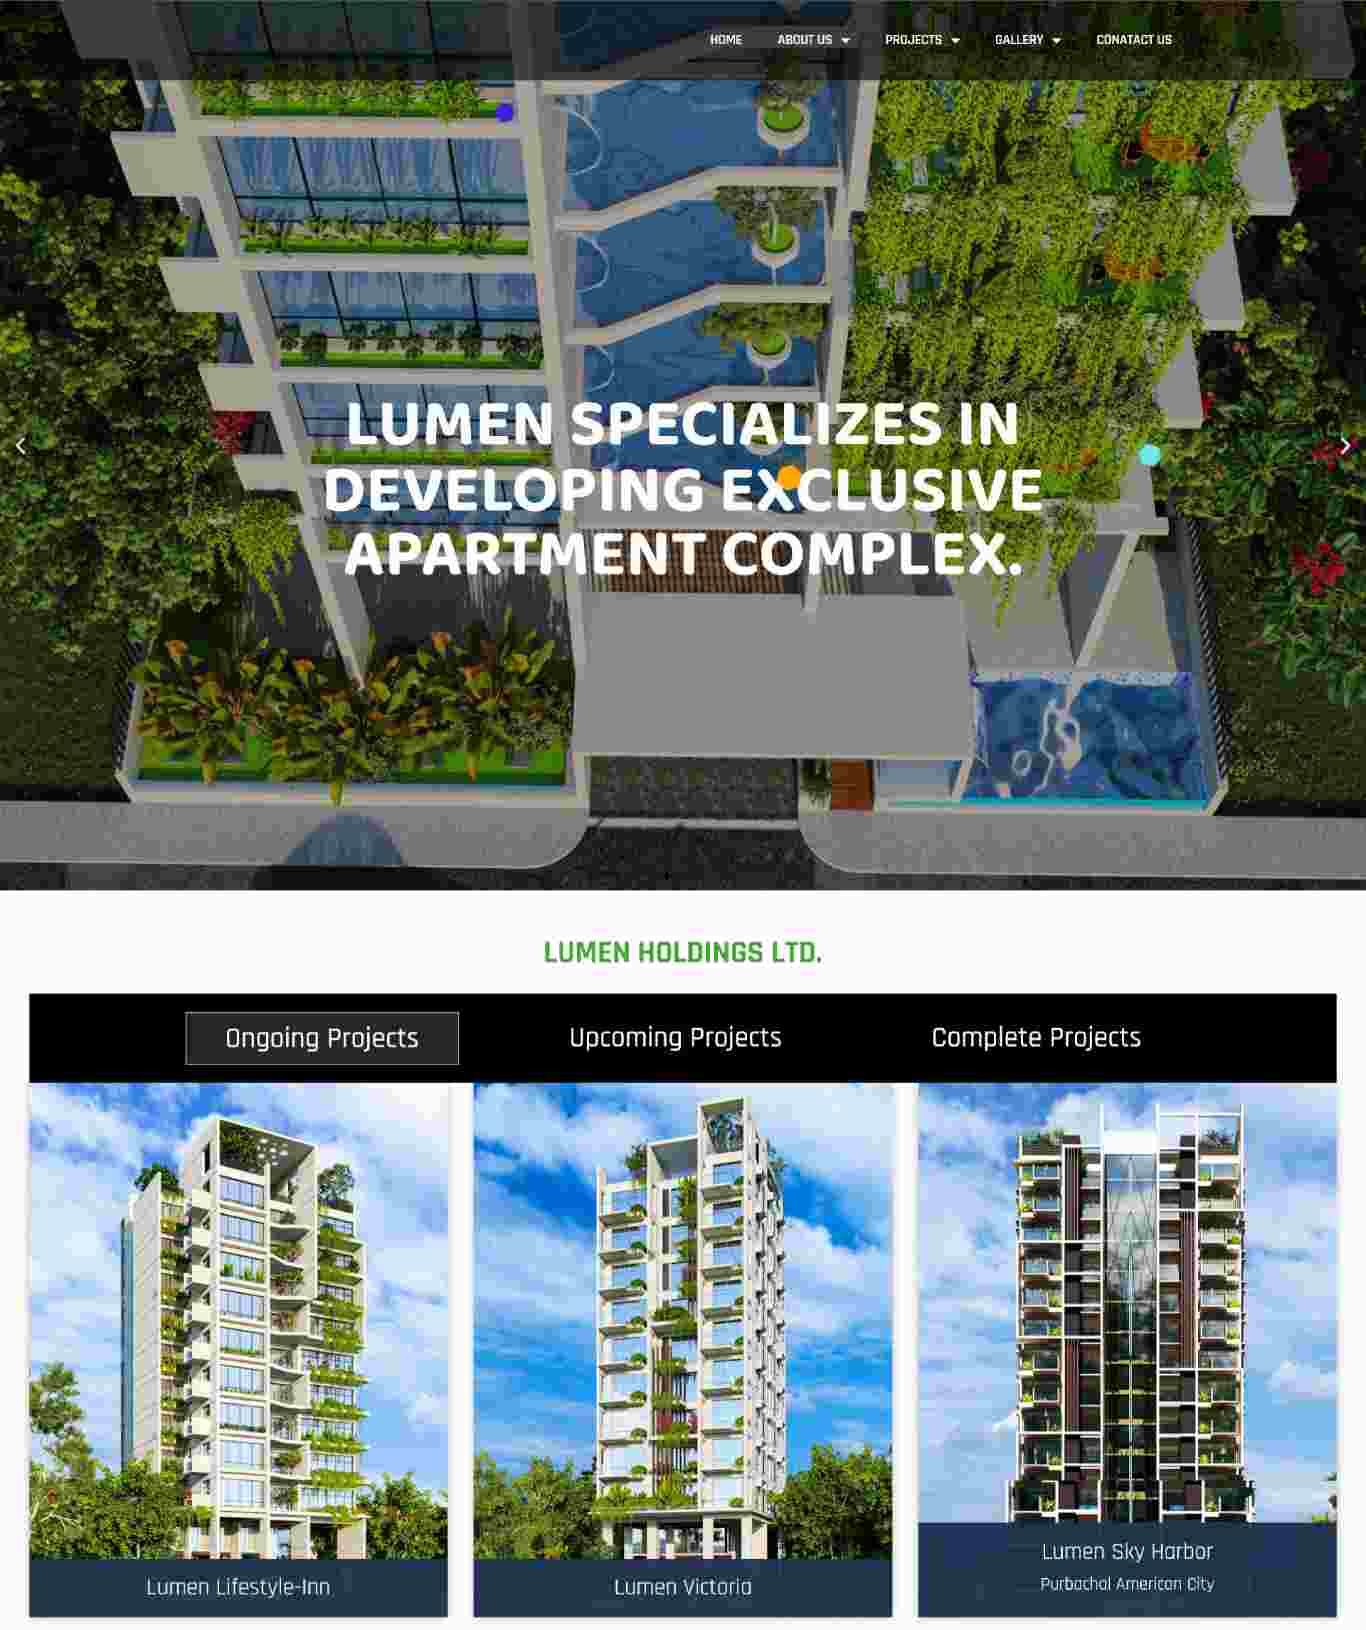 lumen specializes in developing exclusive apartment